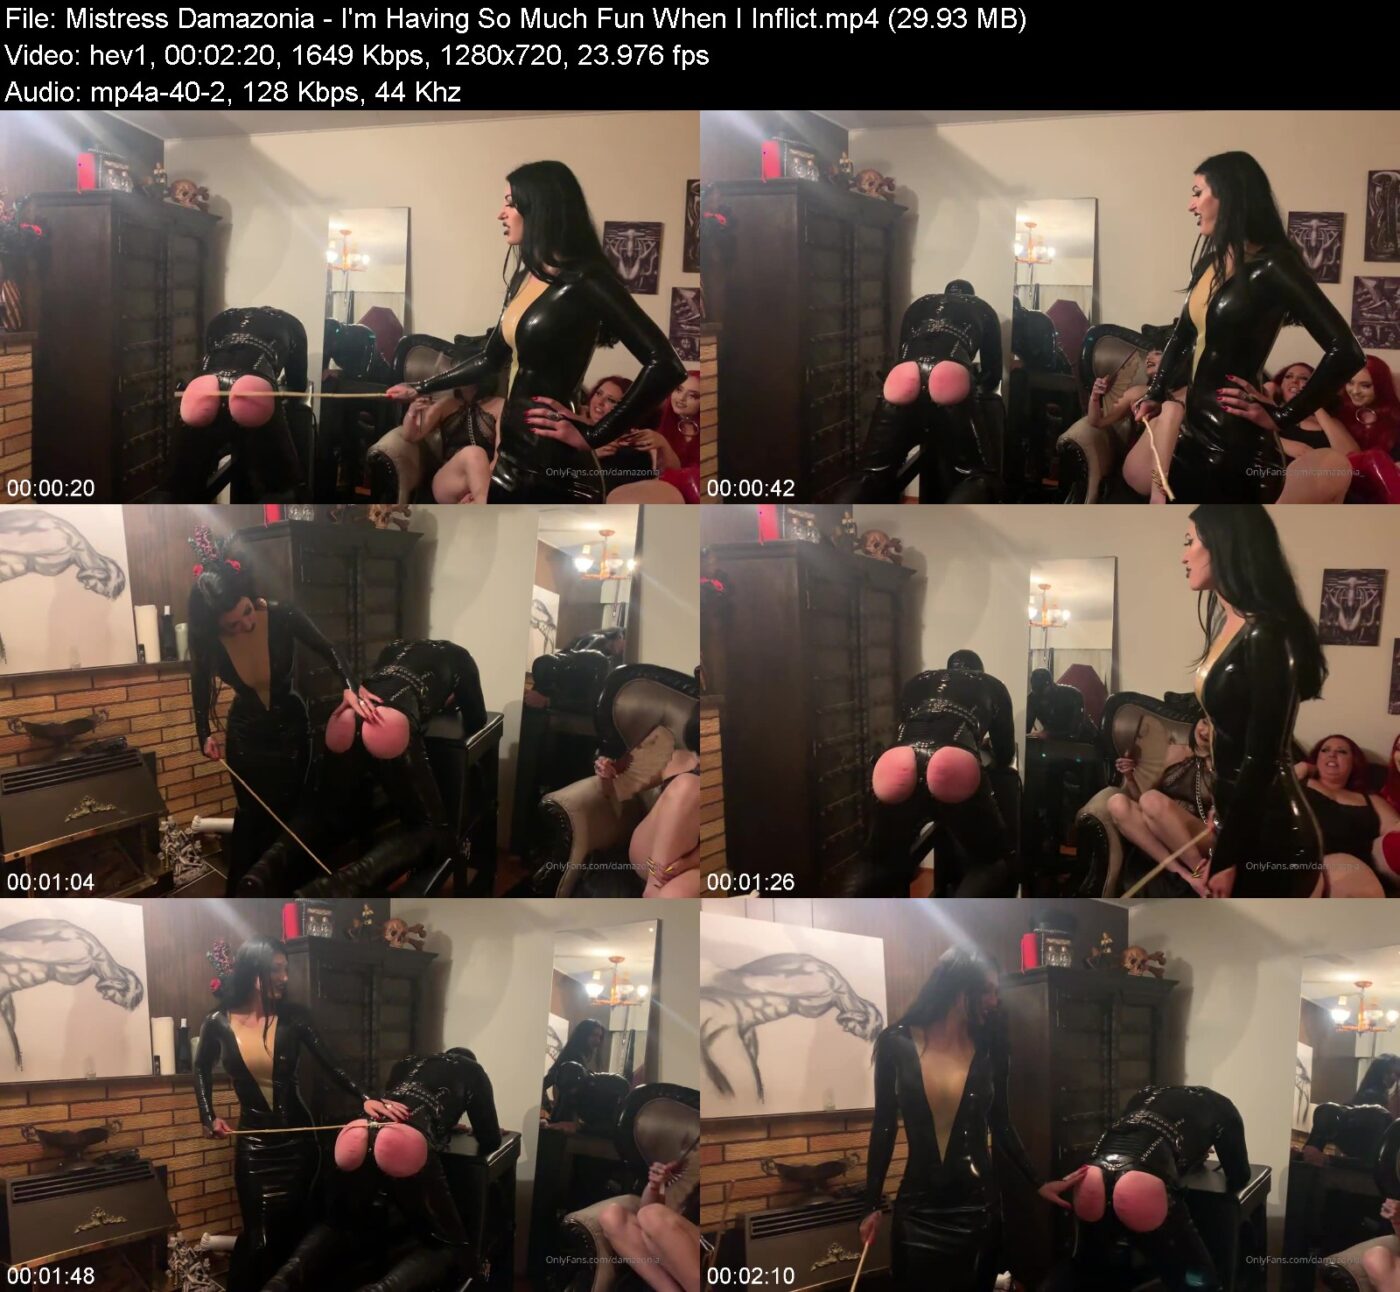 Actress: Mistress Damazonia. Title and Studio: I’m Having So Much Fun When I Inflict